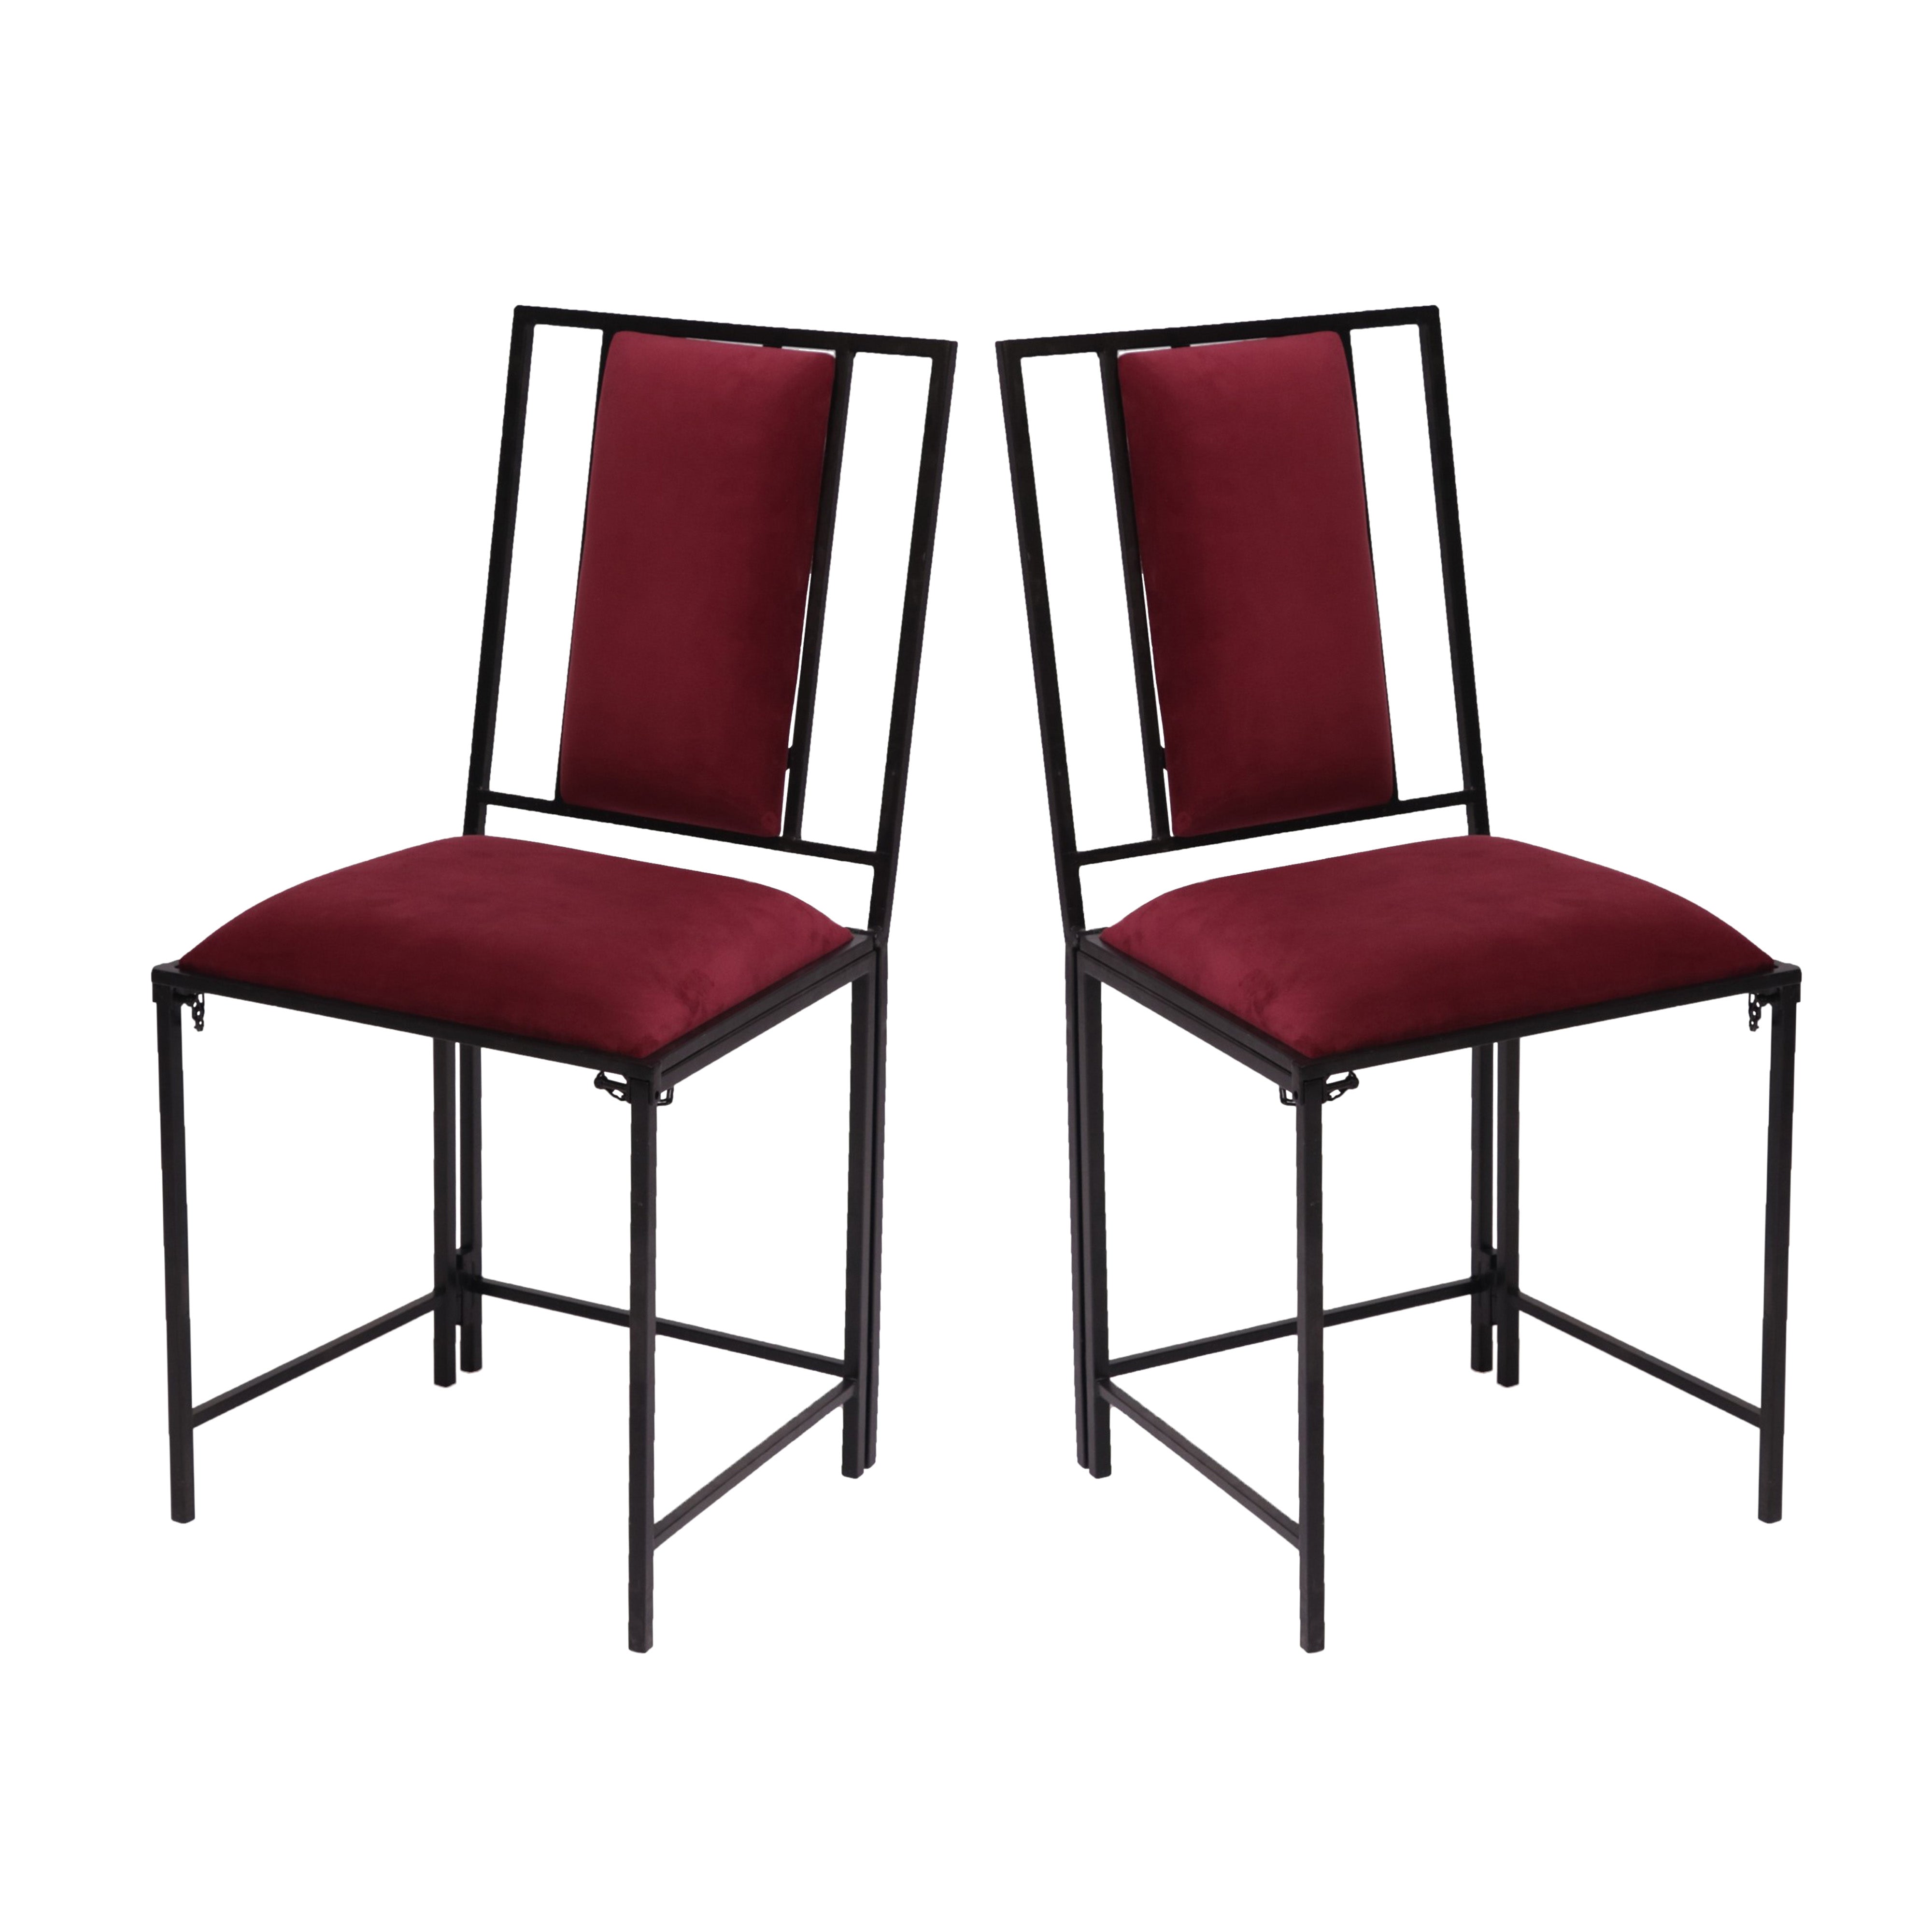 (Set of 2) Red upholstered Wooden Metallic Dinning Folding Chair Dining Chair